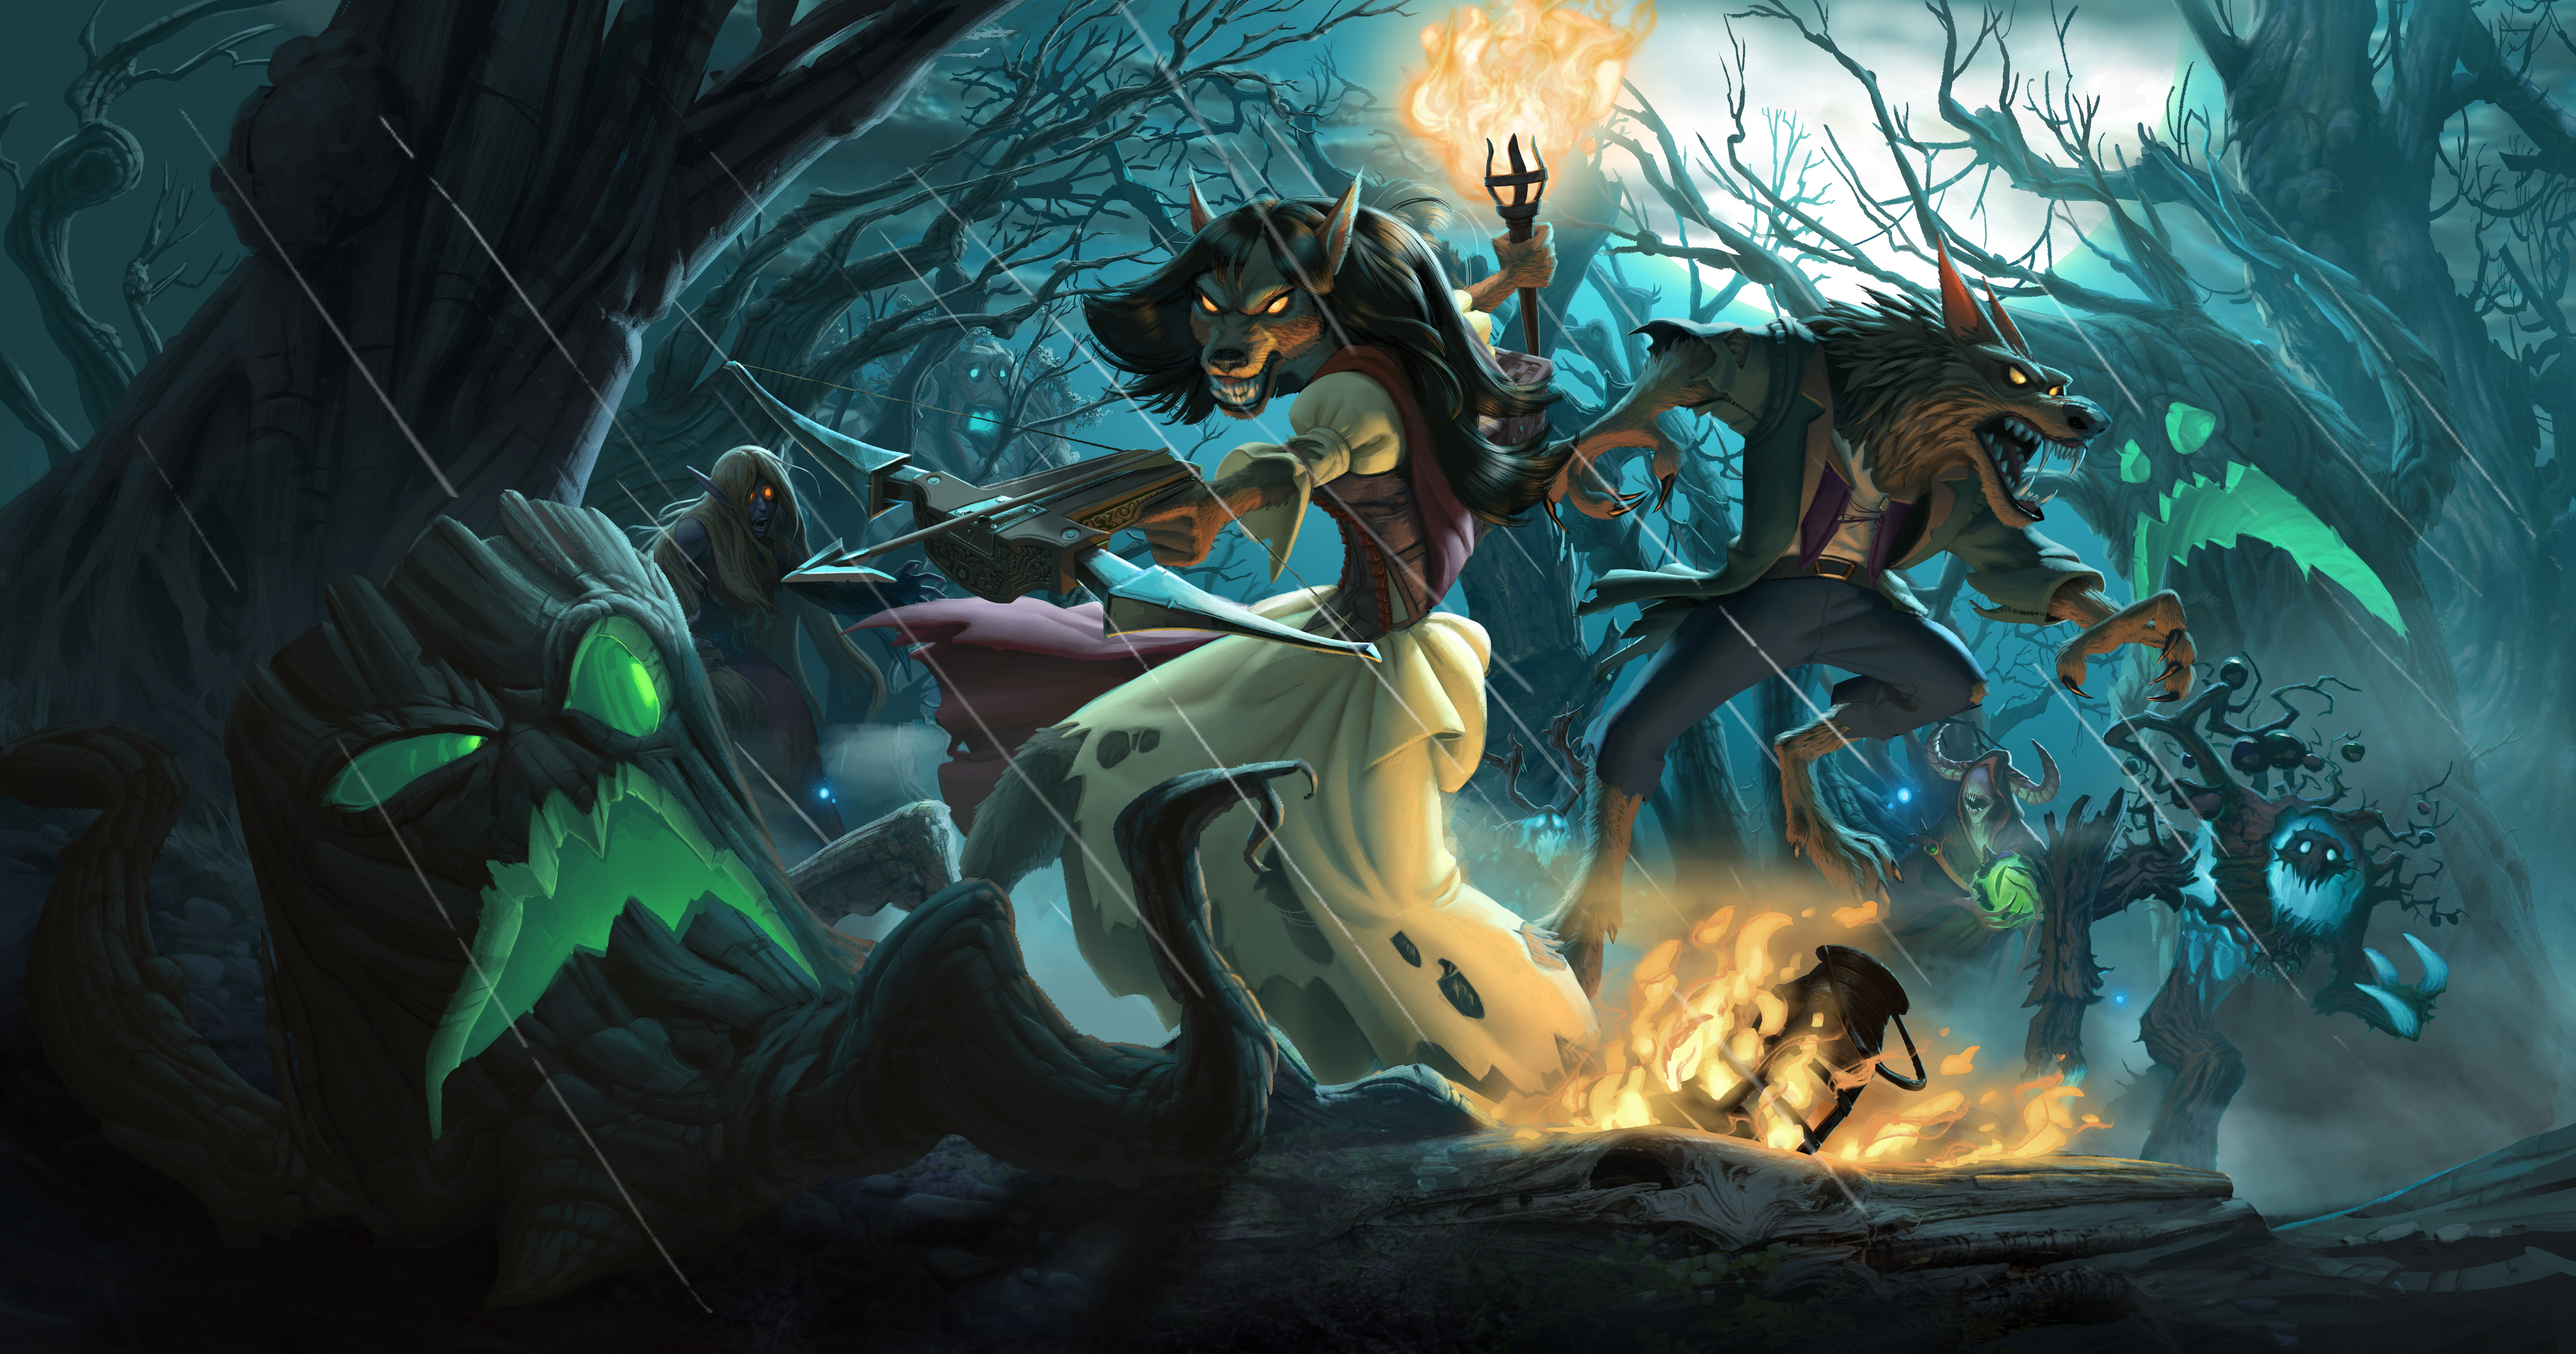 Wallpaper Hearthstone The Witchwood Hearthstone, Hearthstone Wallpaper, Game